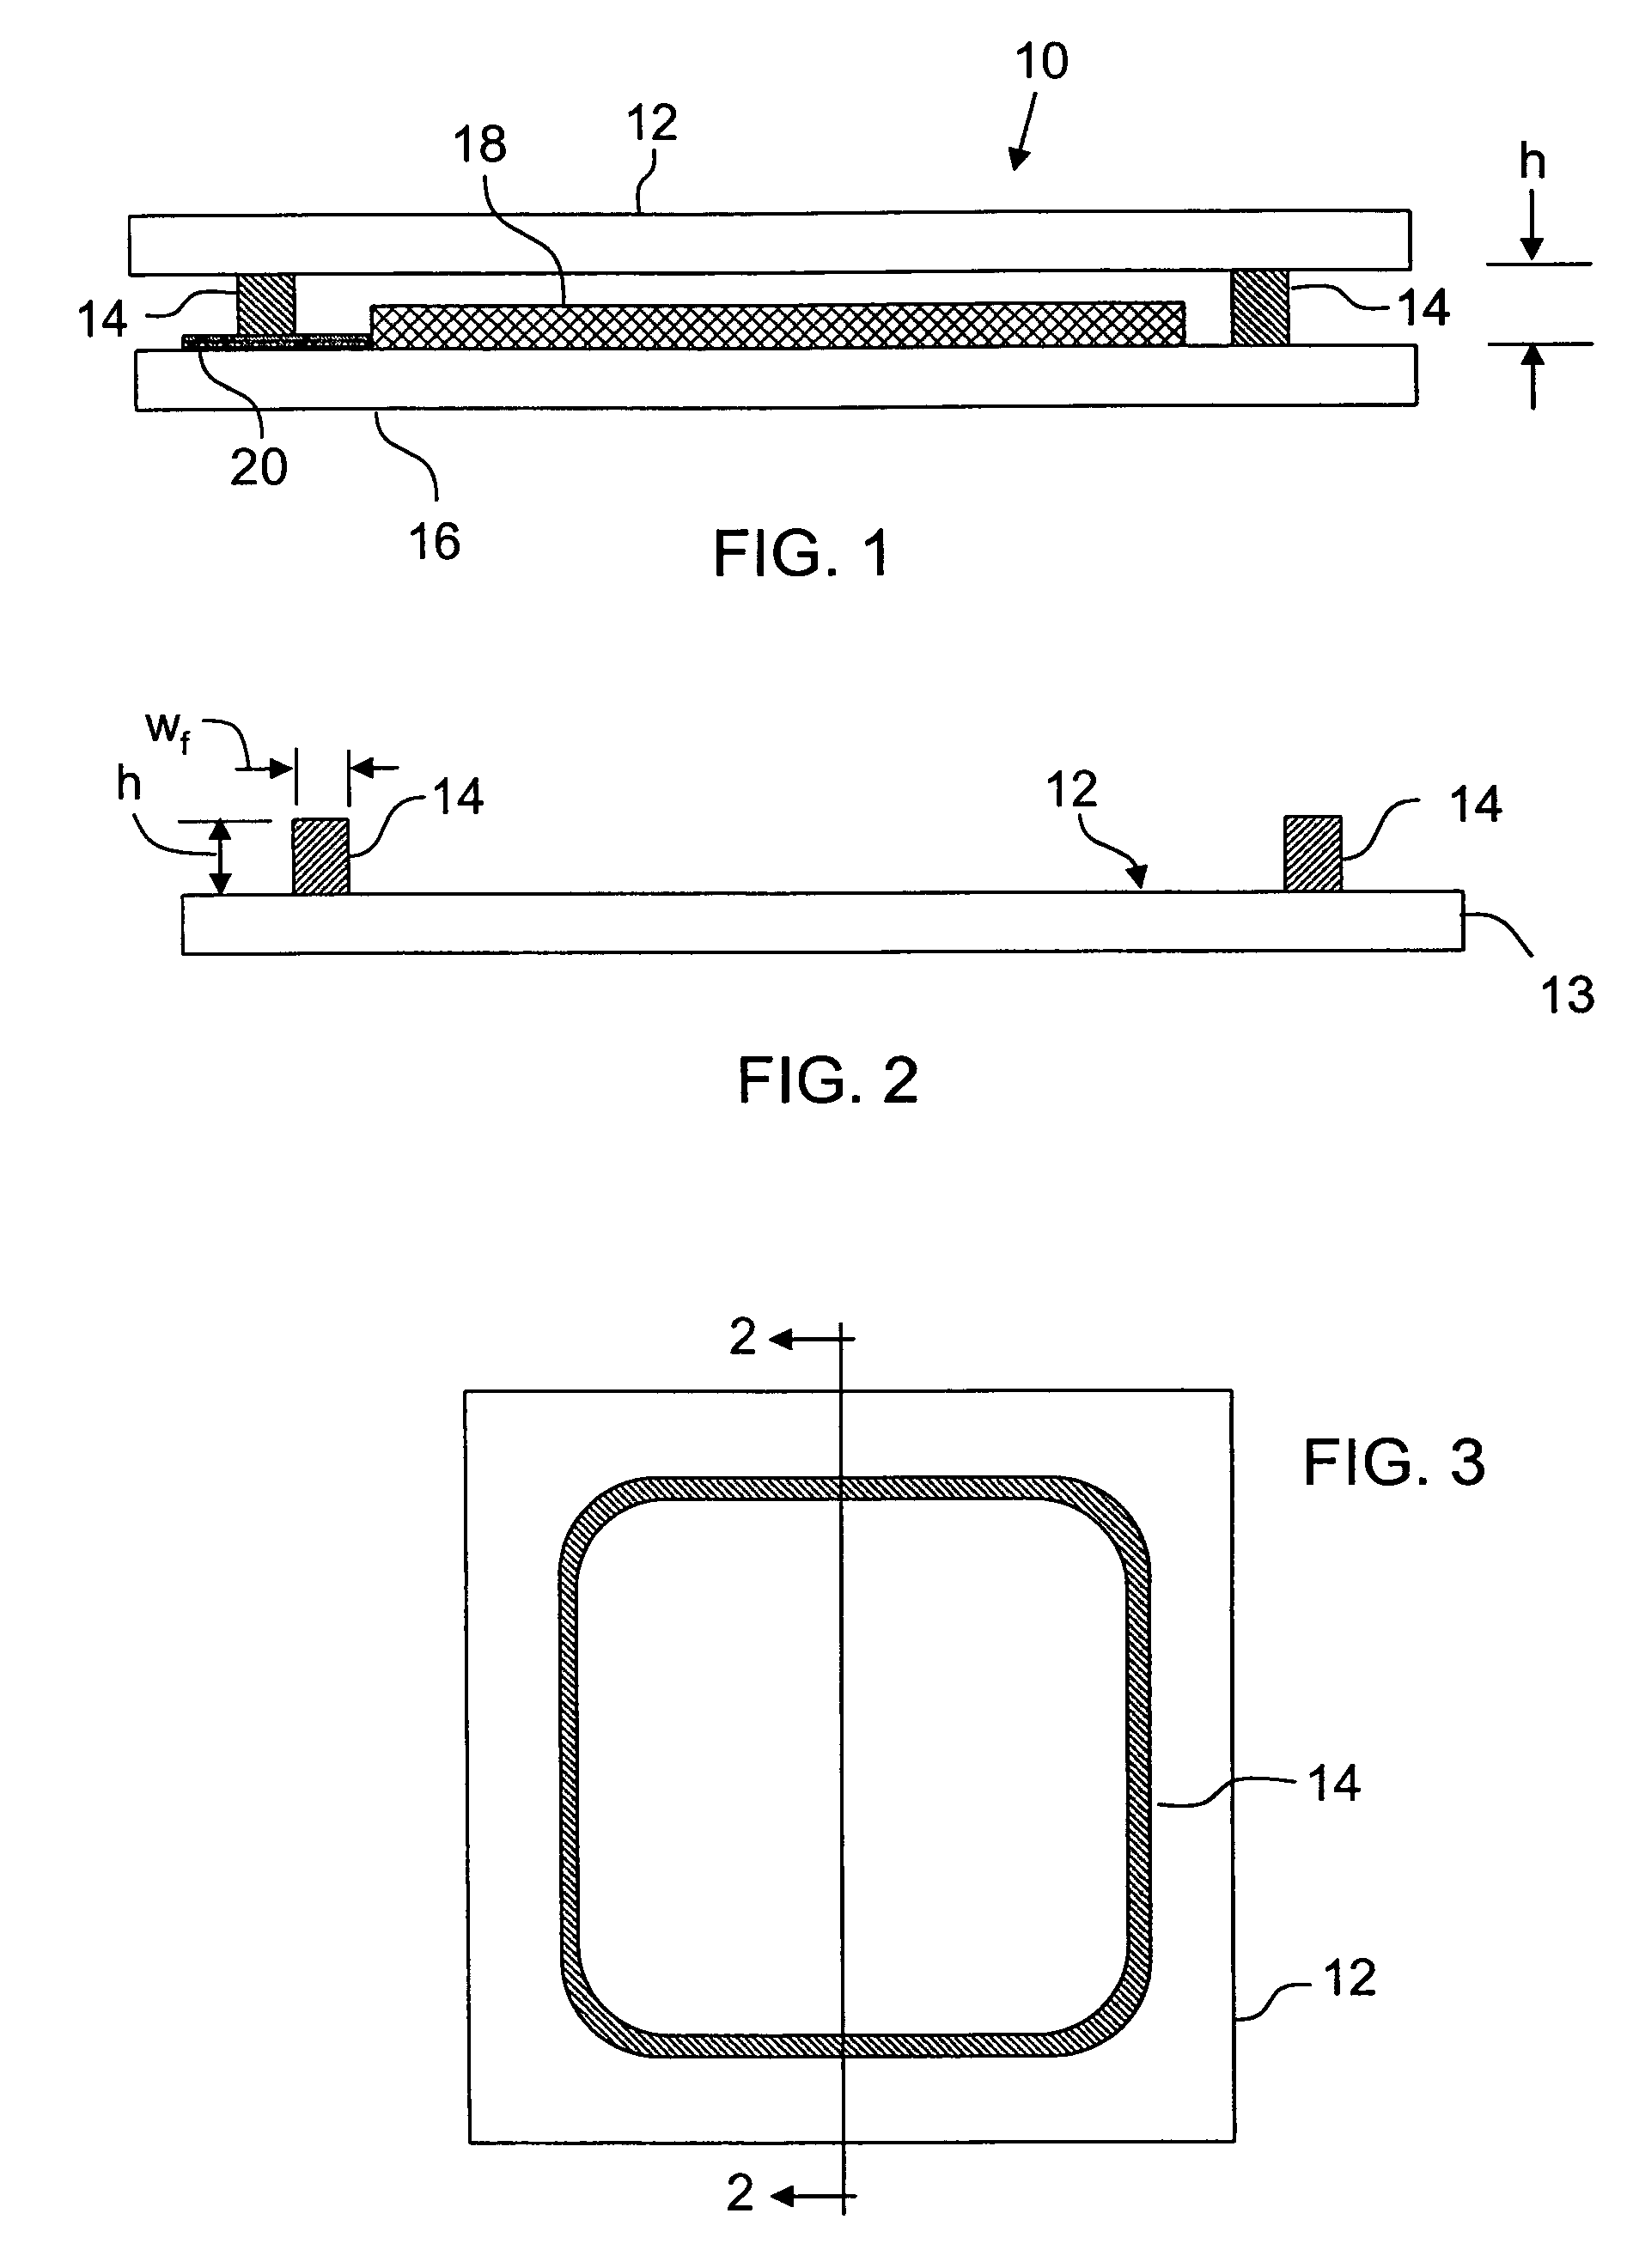 Method of encapsulating a display element with frit wall and laser beam